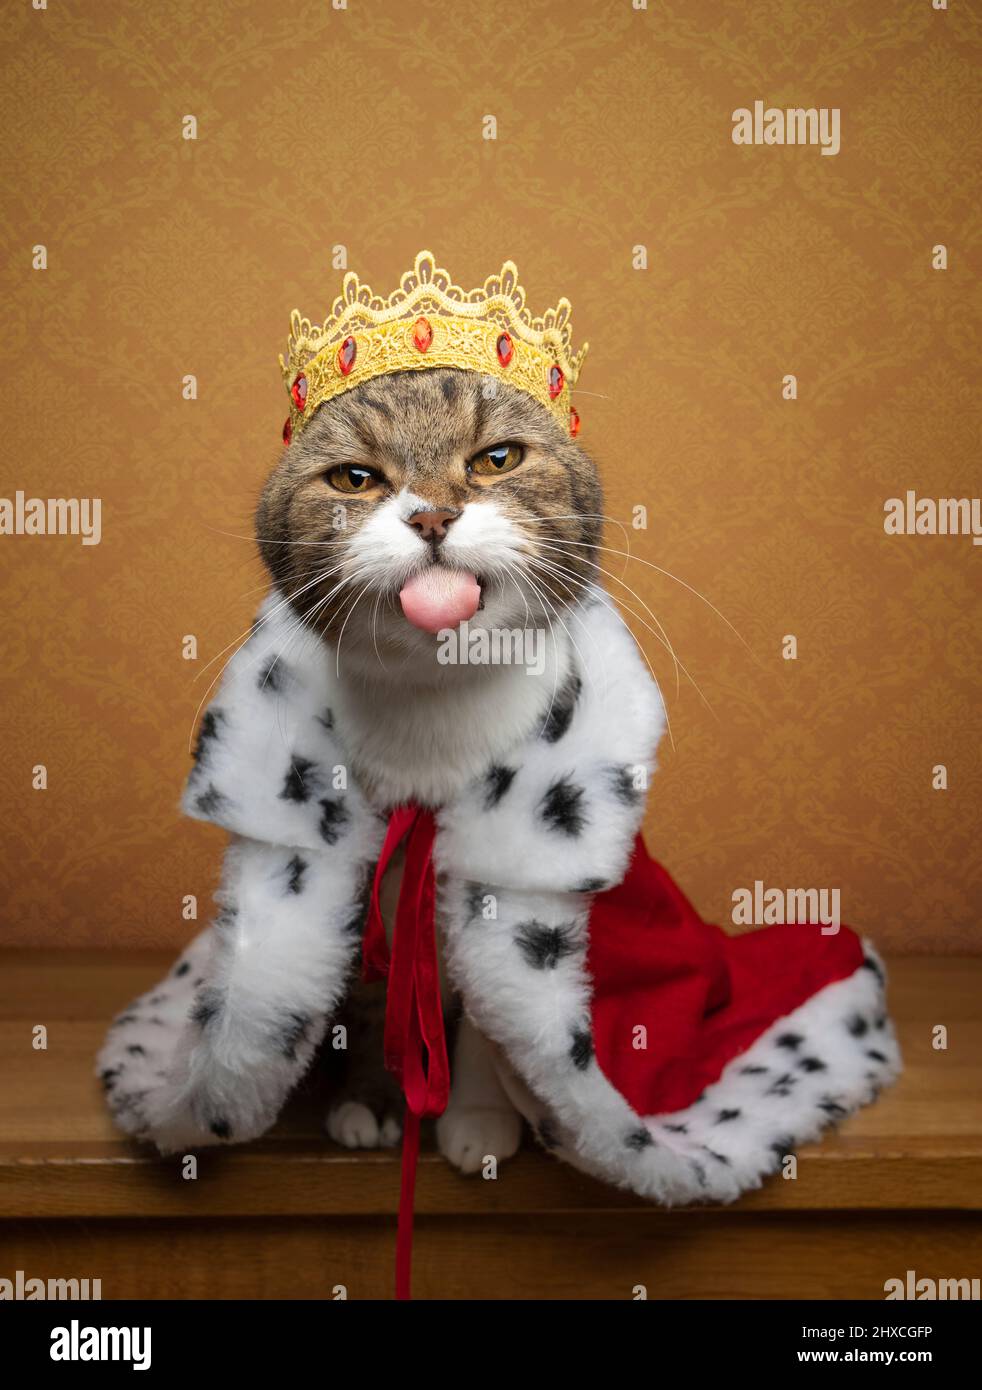 funny naughty cat wearing king costume and crown like a royal kitty sticking out tongue Stock Photo